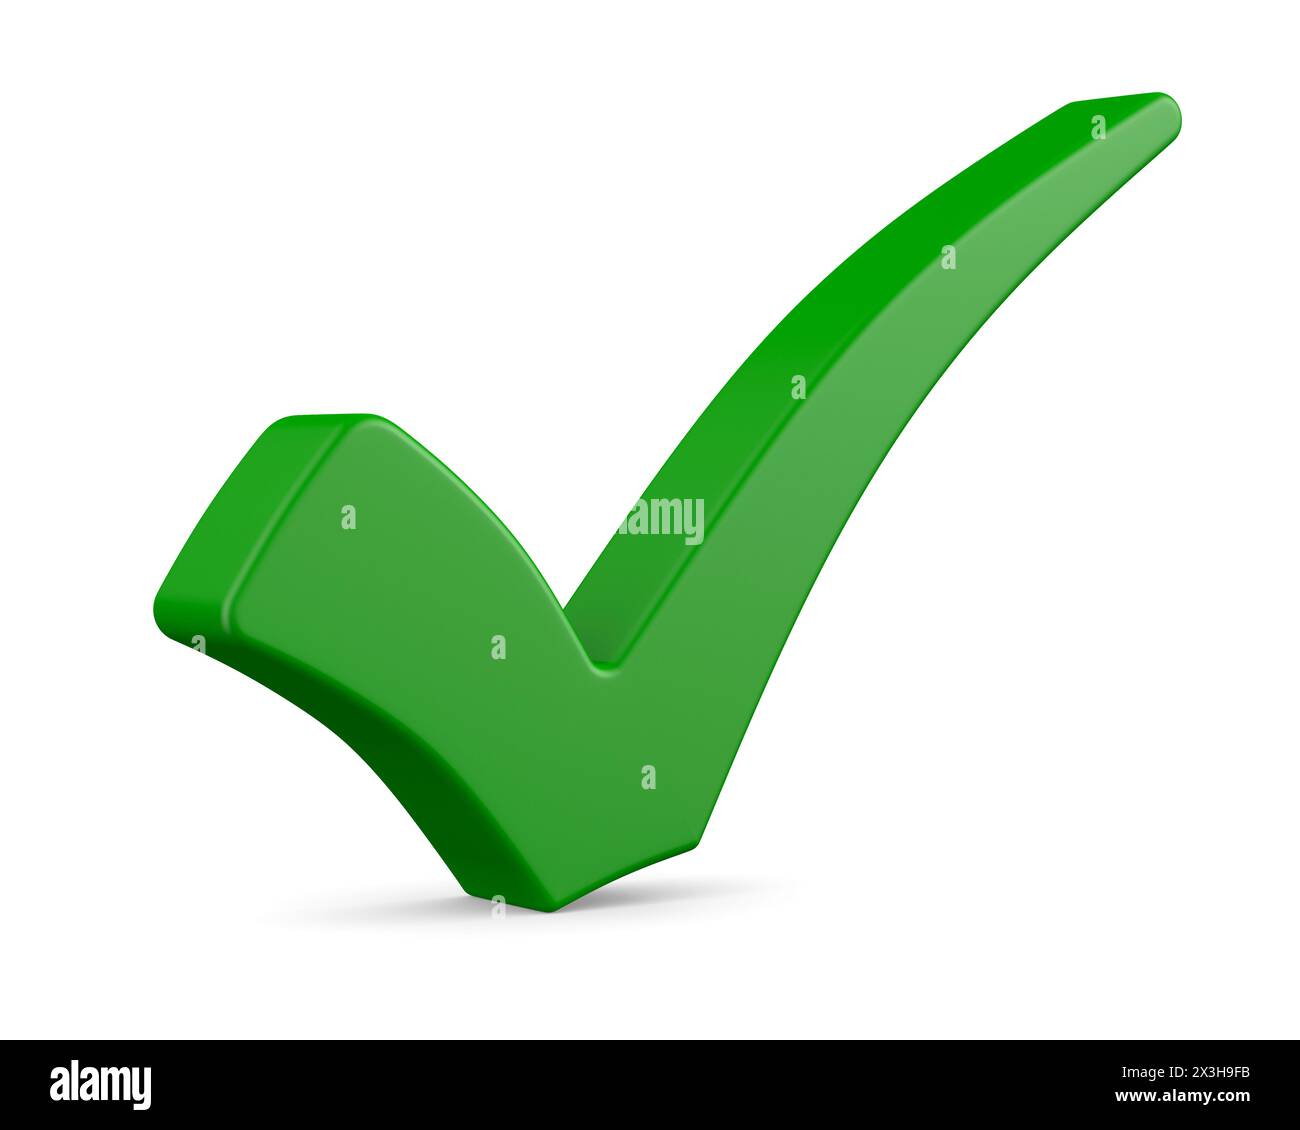 Check mark sign on white background. Isolated 3D illustration Stock Photo